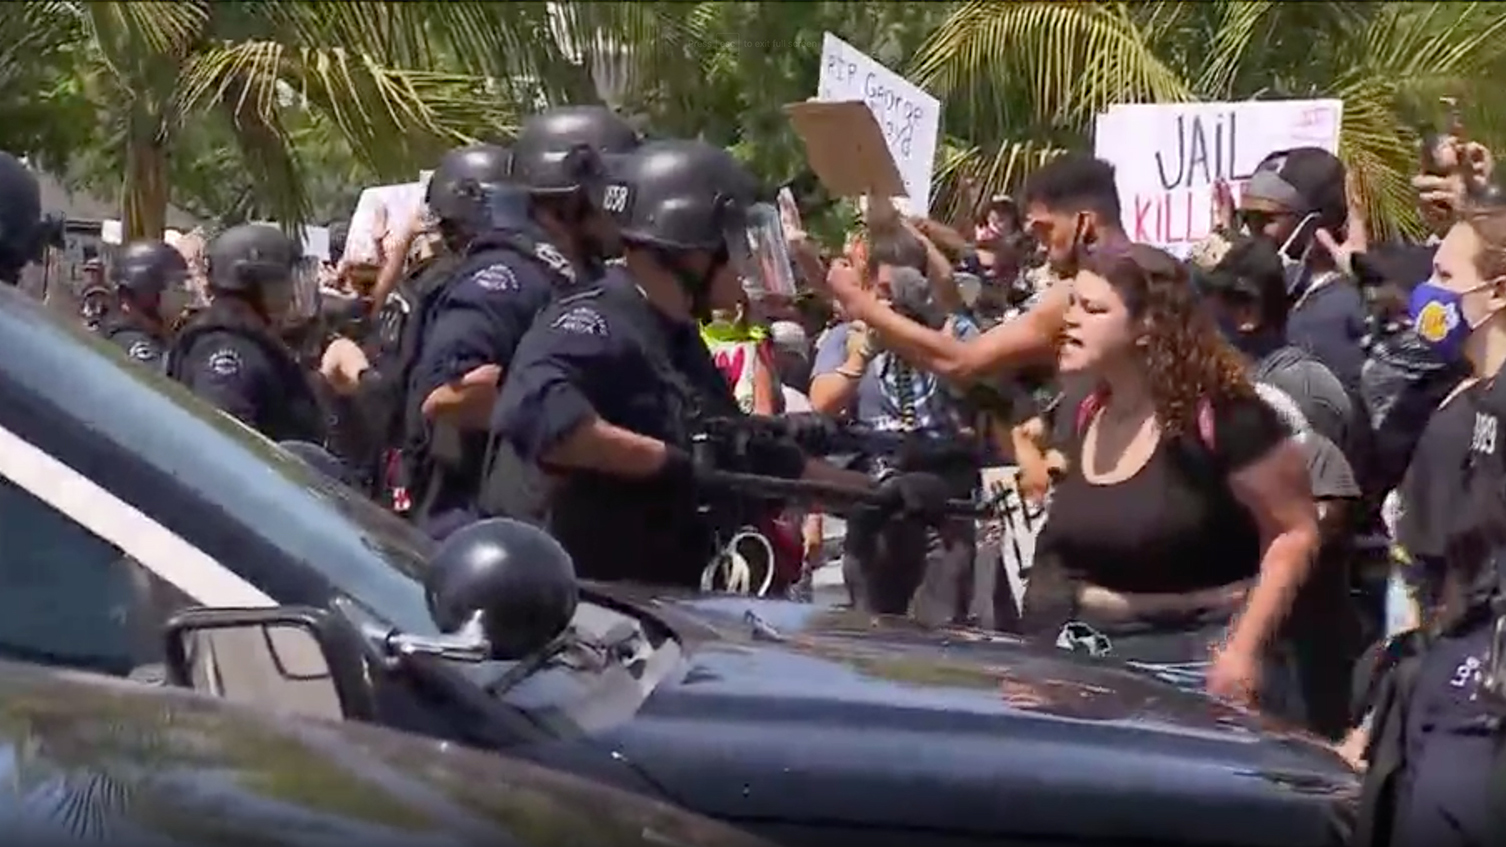 Cars Vandalized In Los Angeles And Rubber Bullets Fired At Protesters